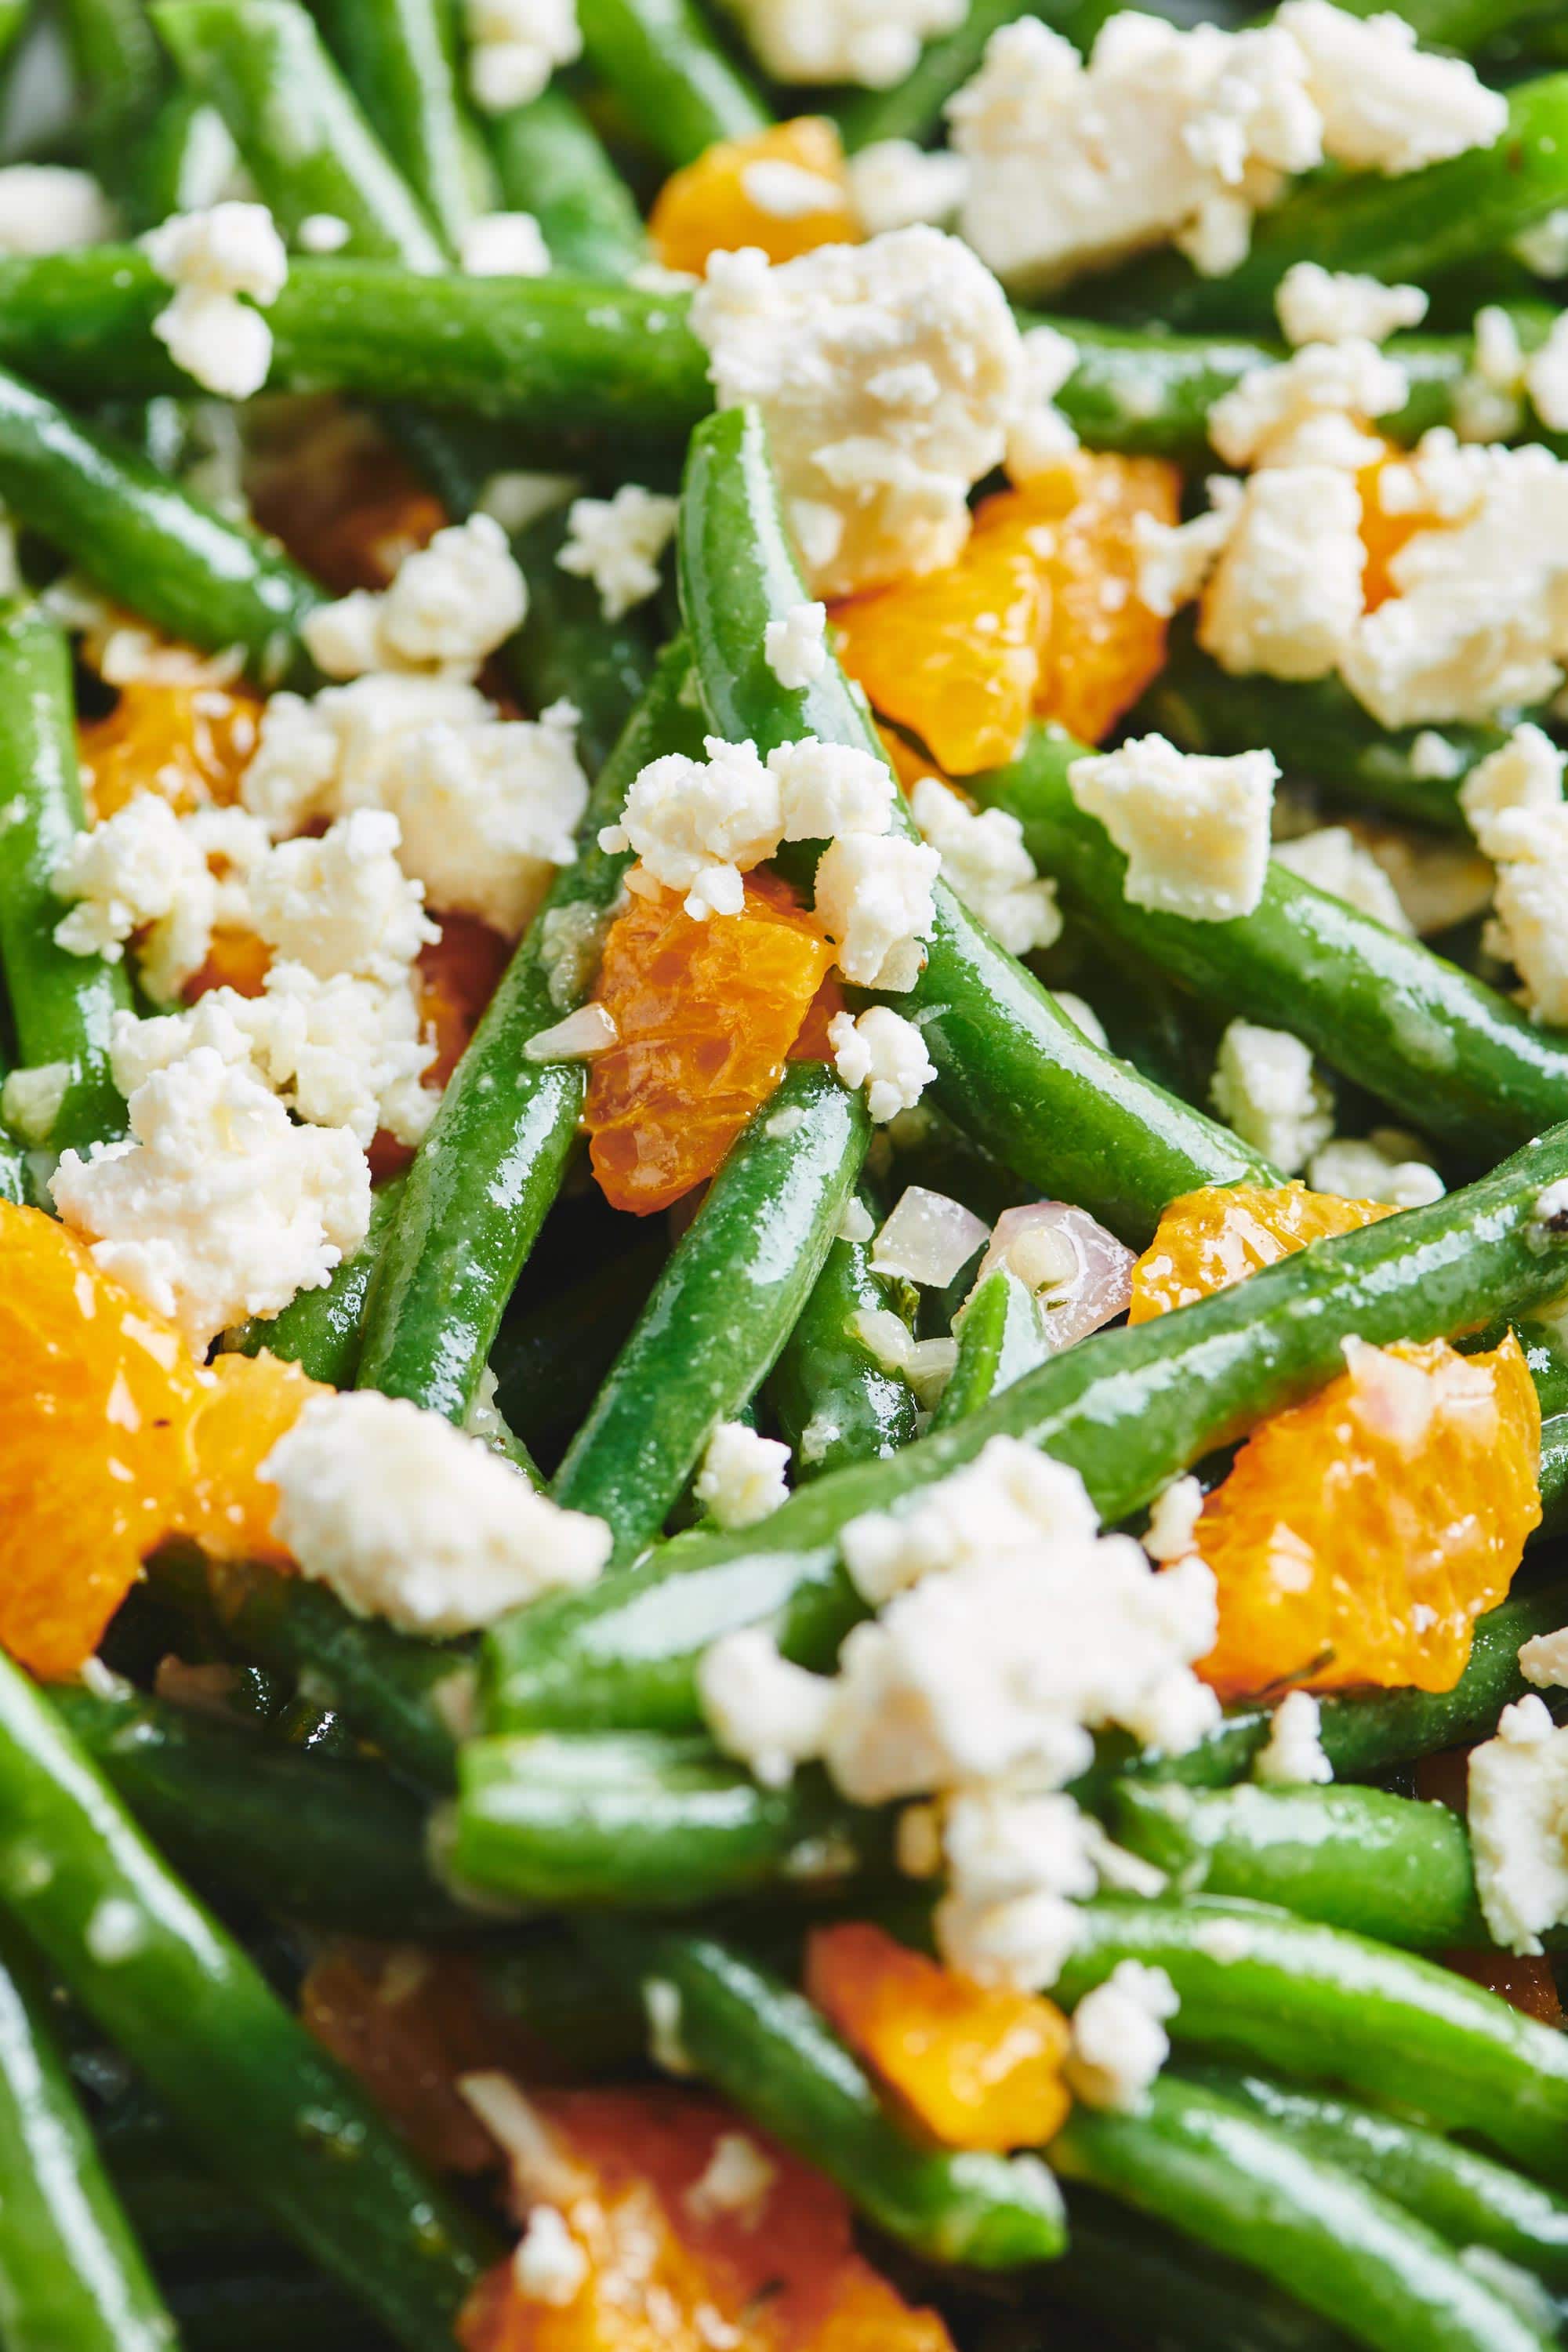 Green Beans, feta, and clementine oranges mixed together with dressing.